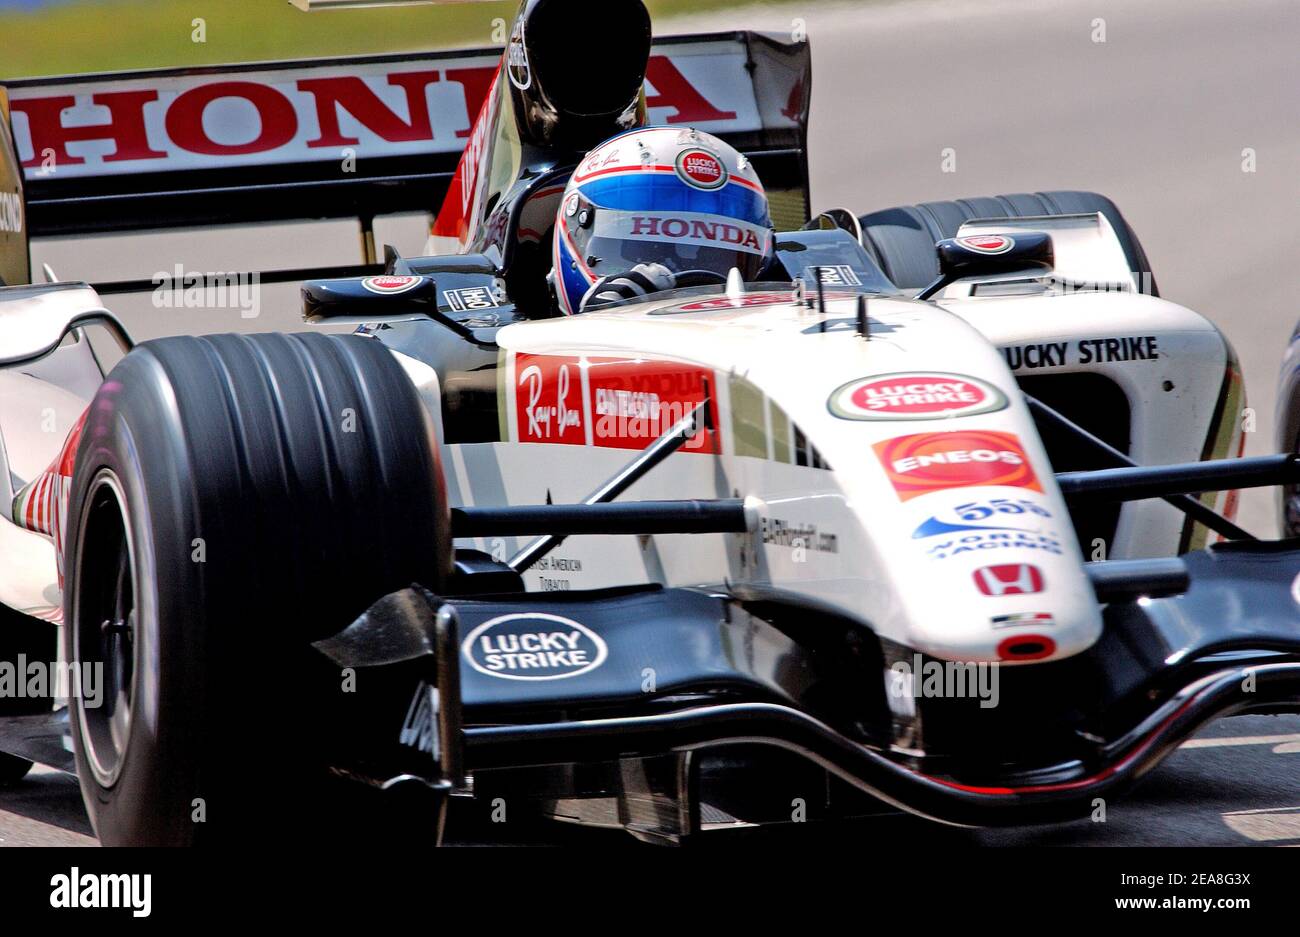 U K Formula 1 driver Anthony Davidson (team bar honda) replaces Takuma Sato (who has been taken ill (fever) and will not take place for the race Sunday afternoon) during the G.P of the Sepang circuit, Malaysia, on March 18, 2005. Photo by Thierry Gromik/ABACA Stock Photo